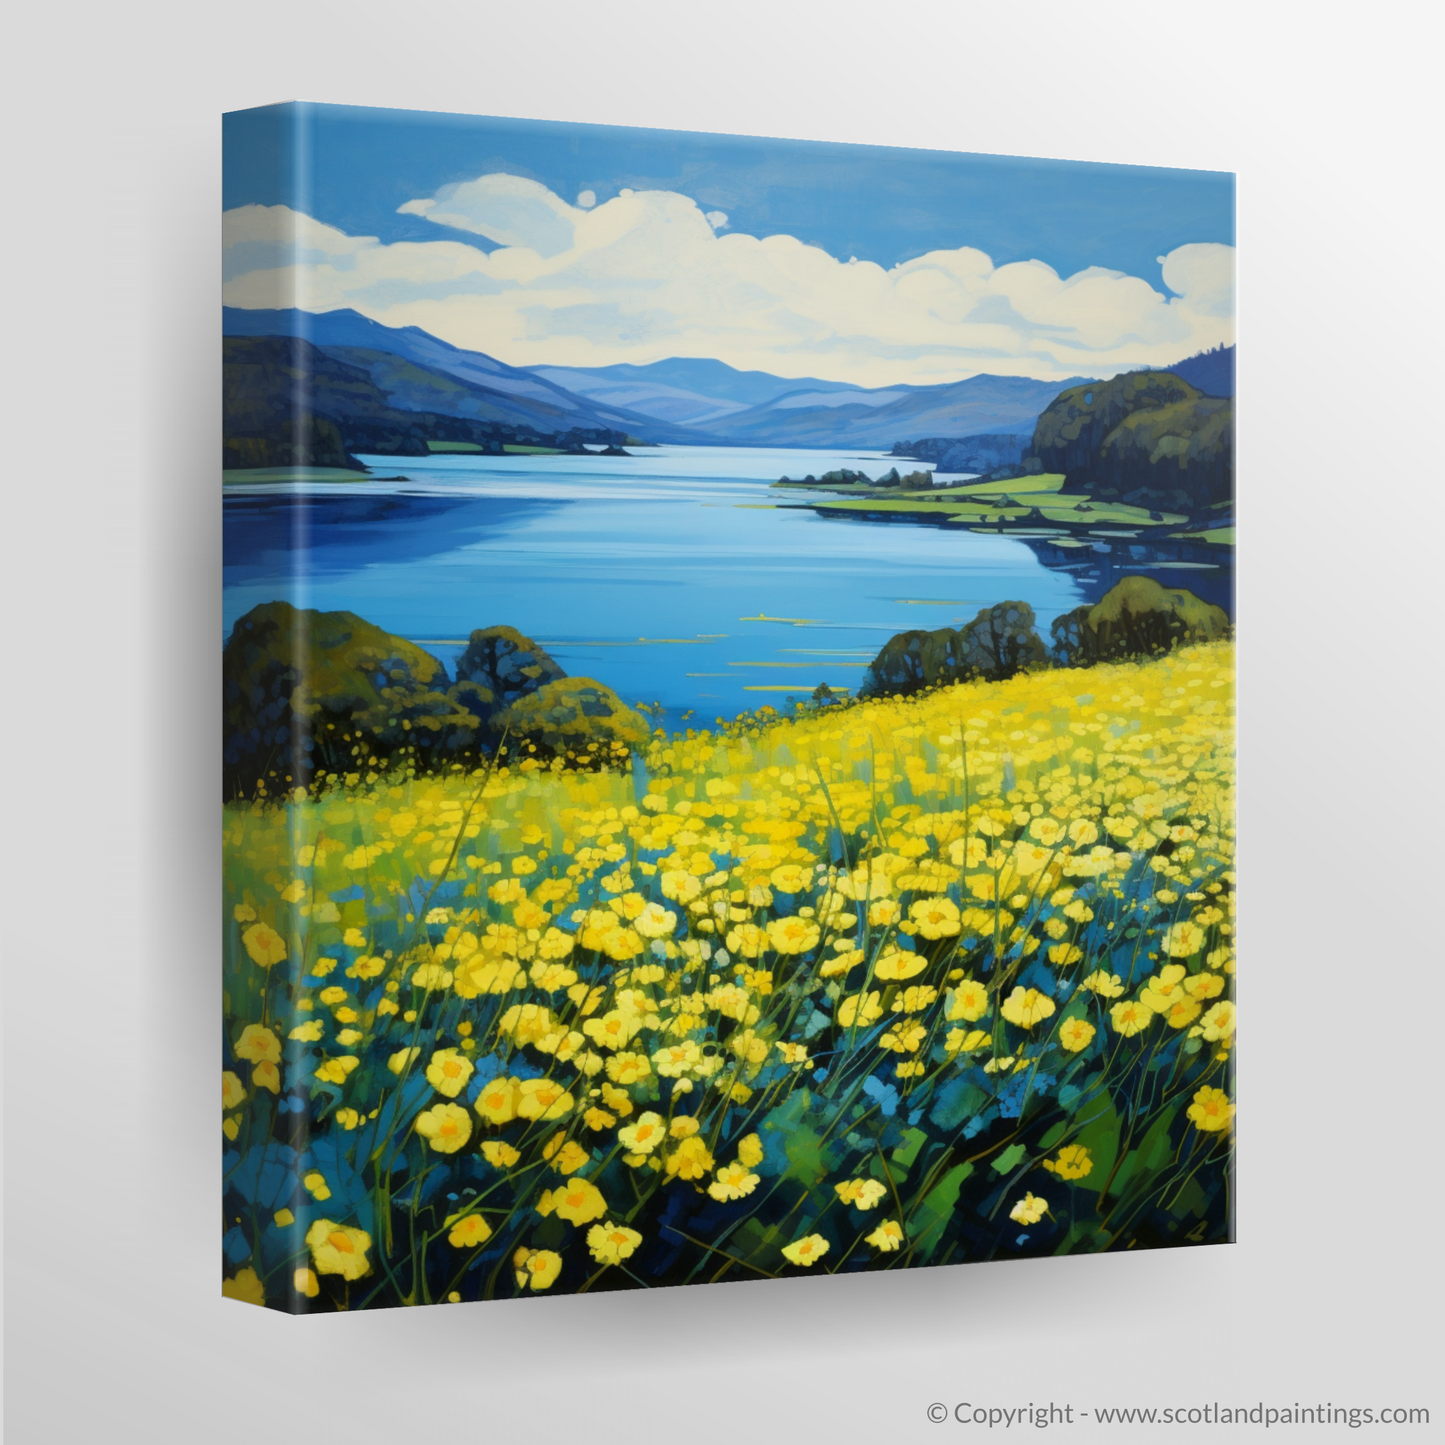 Loch Tay's Lesser Celandine: A Color Field Ode to Scottish Spring